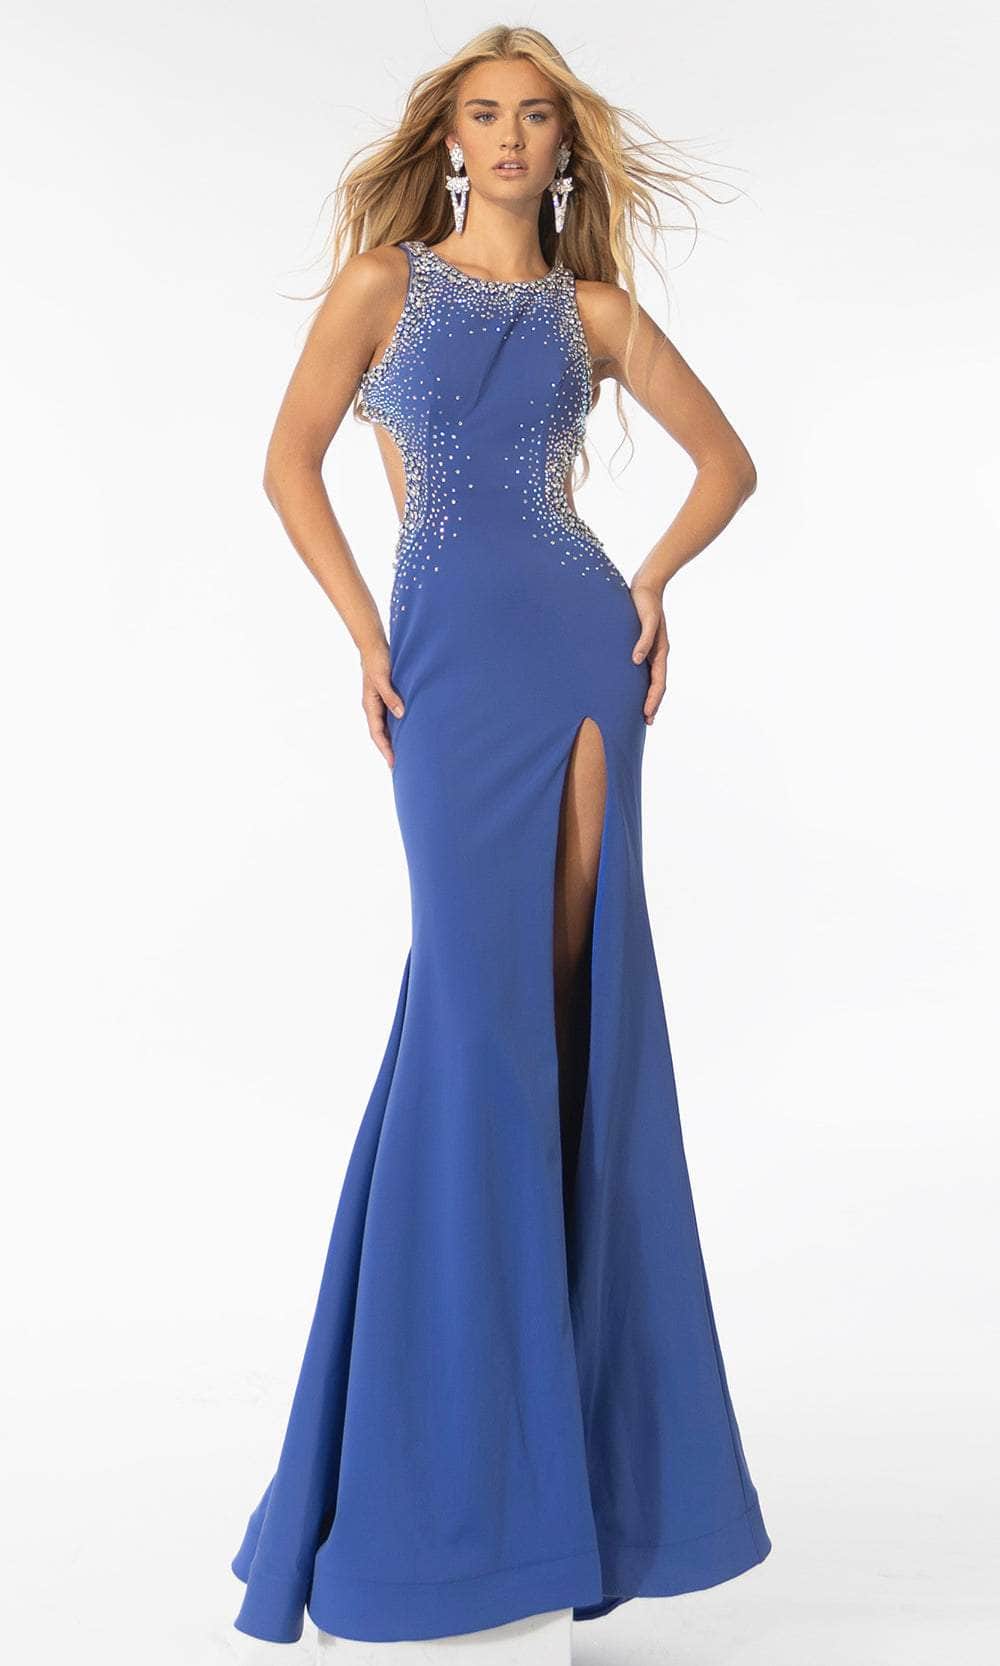 Image of Ava Presley 39237 - Jewel Neck Cutout Prom Gown